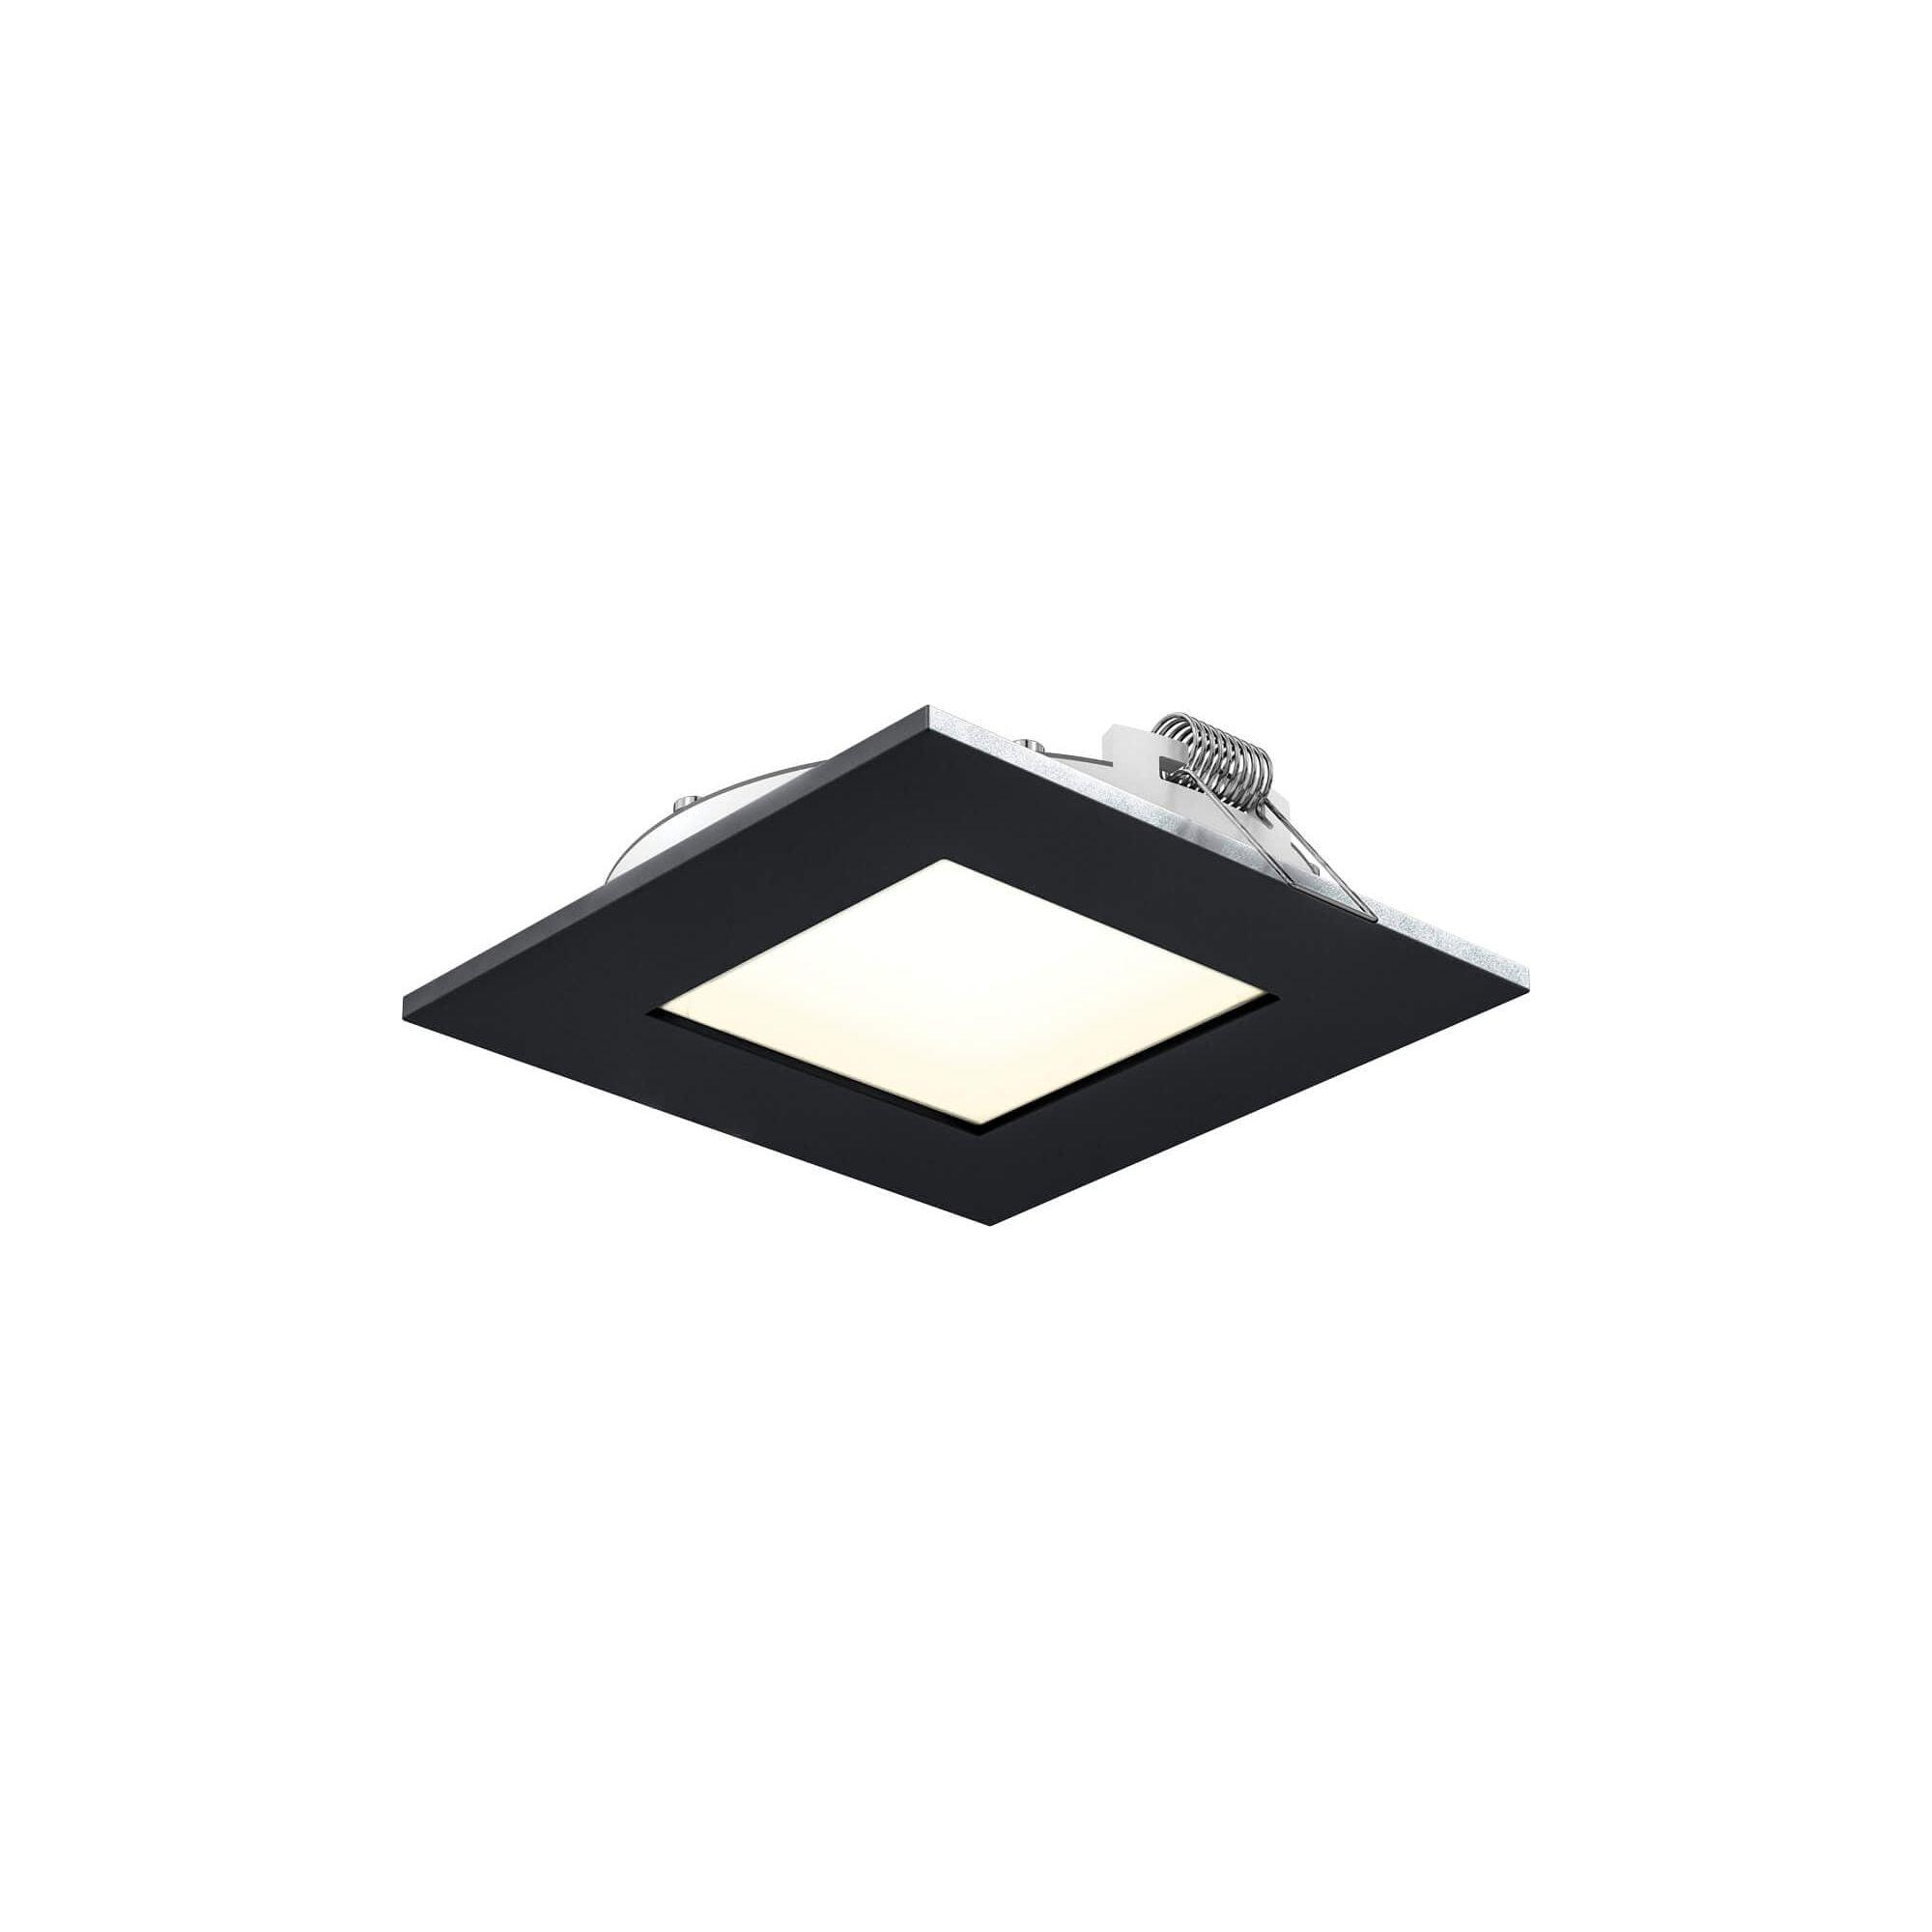 DALS - Square Cct Led Recessed Panel Light - Lights Canada